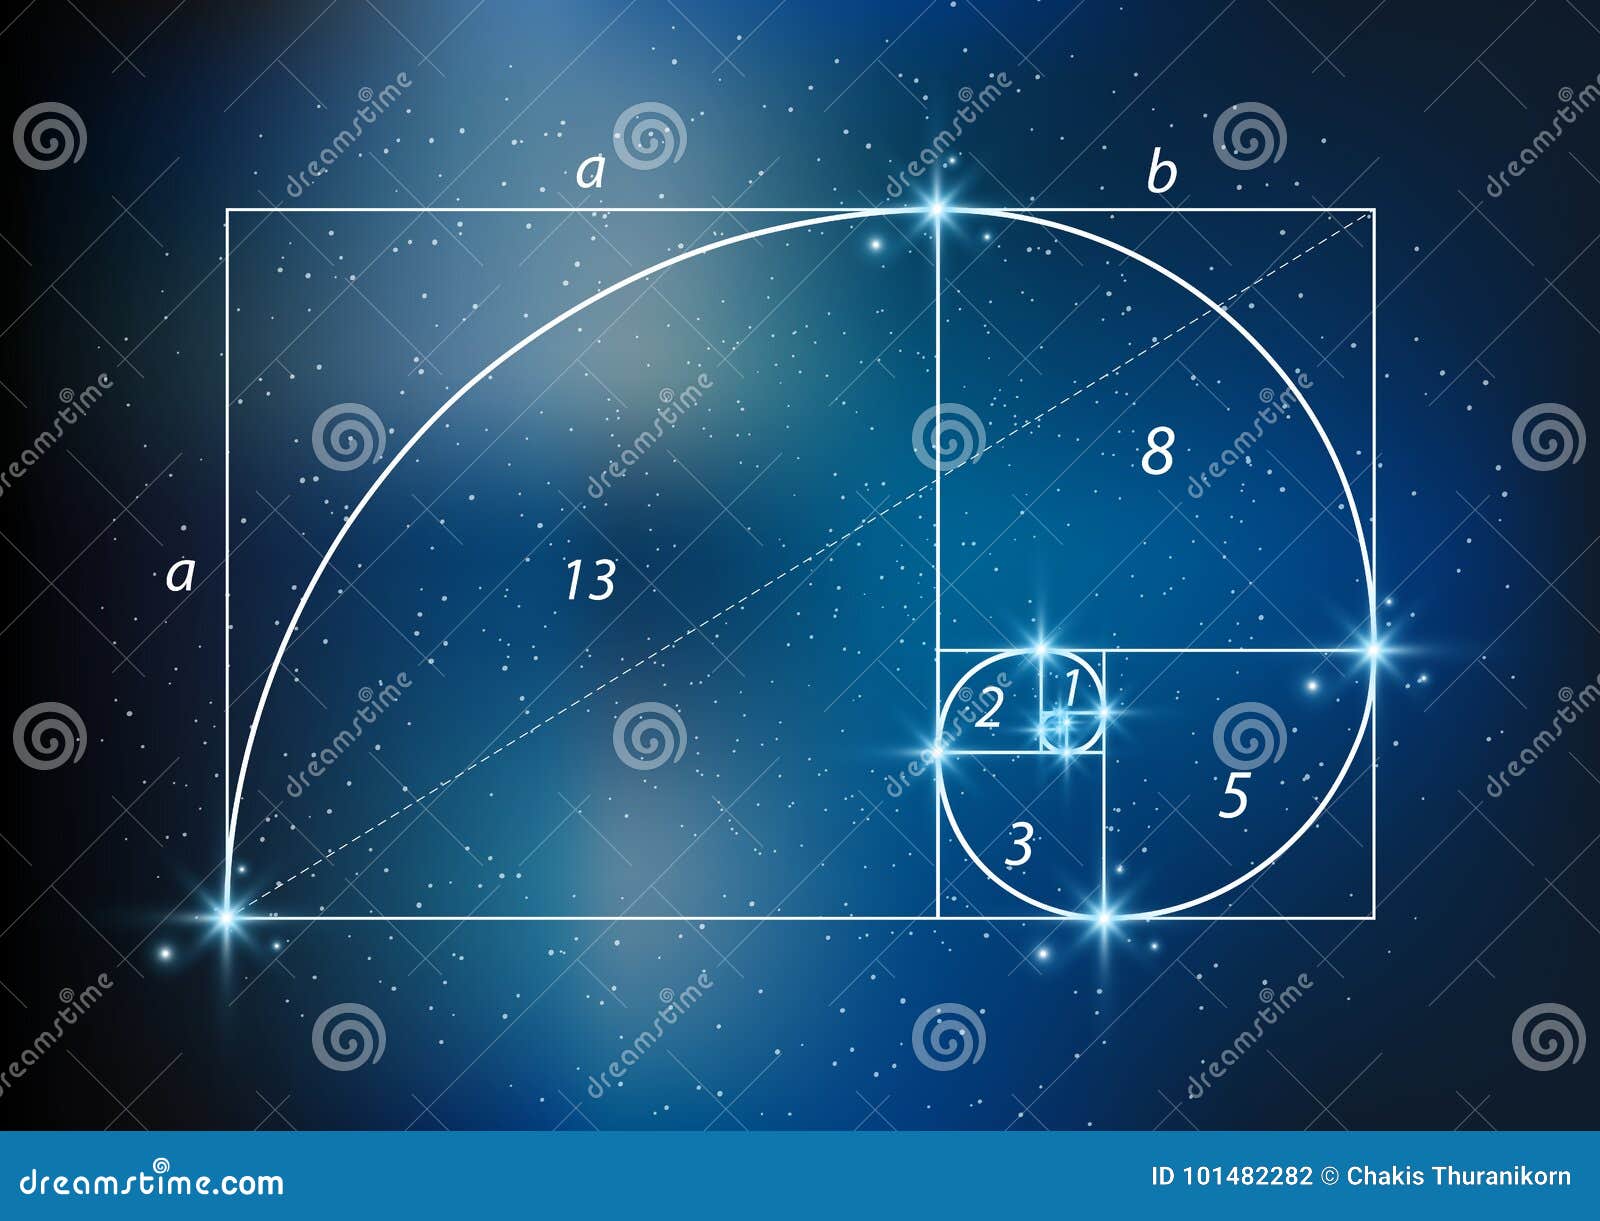 golden section ratio, divine proportion and golden spiral on starry sky,  transparent